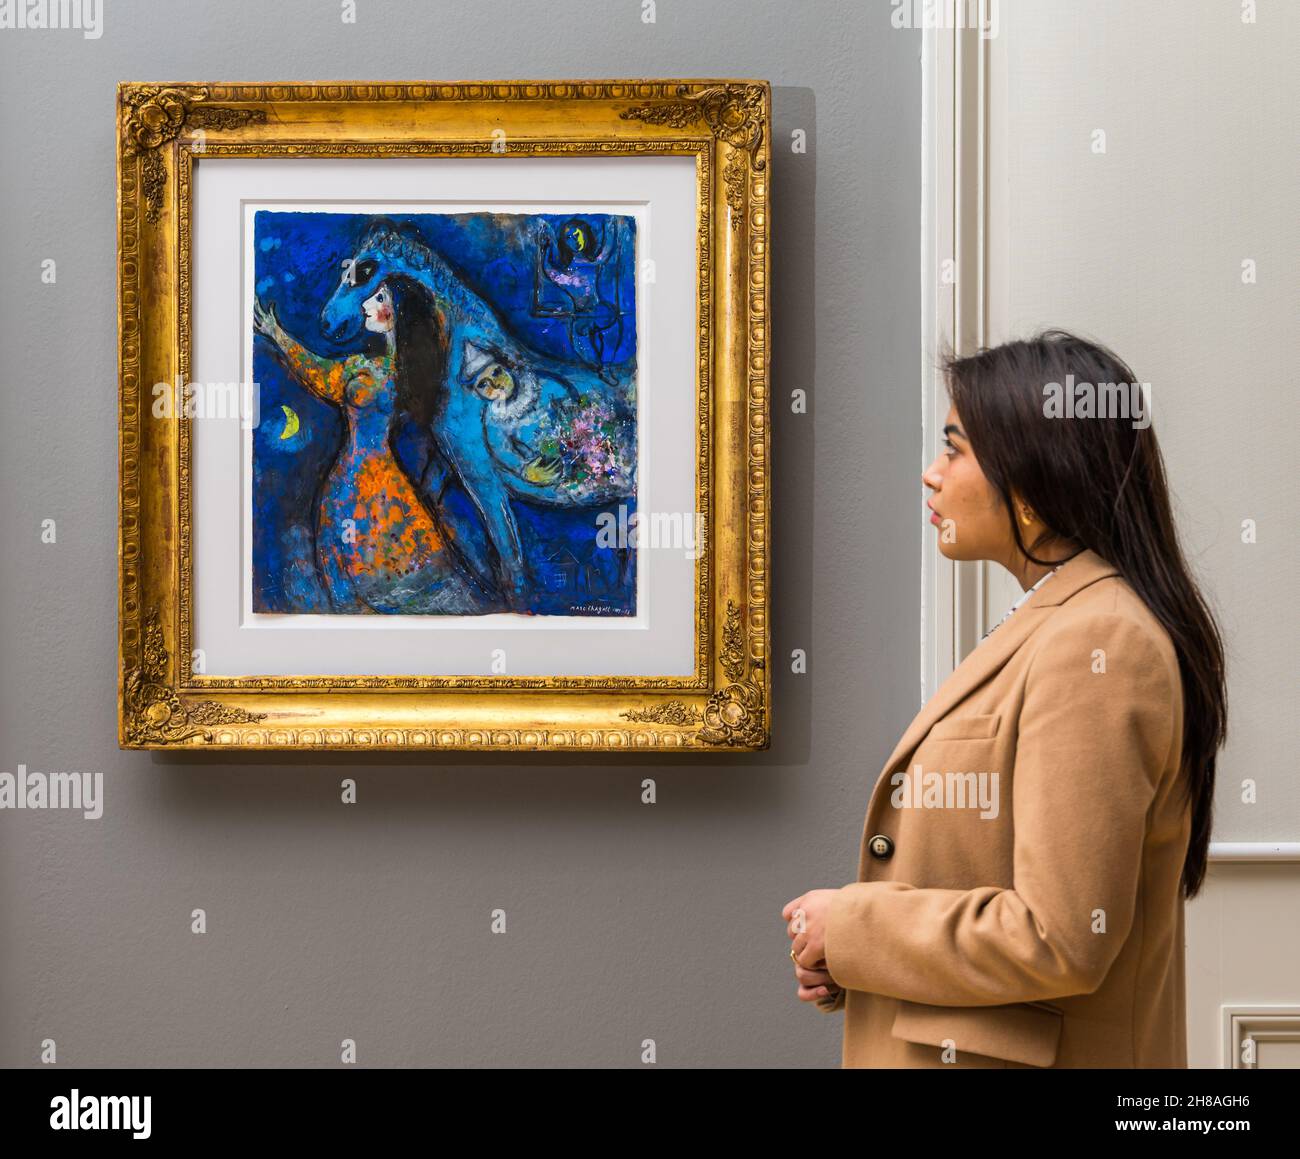 Woman admiring painting by French artist Marc Chagall called The Horse Rider Scottish National Gallery of Modern Art, Edinburgh, Scotland, UK Stock Photo